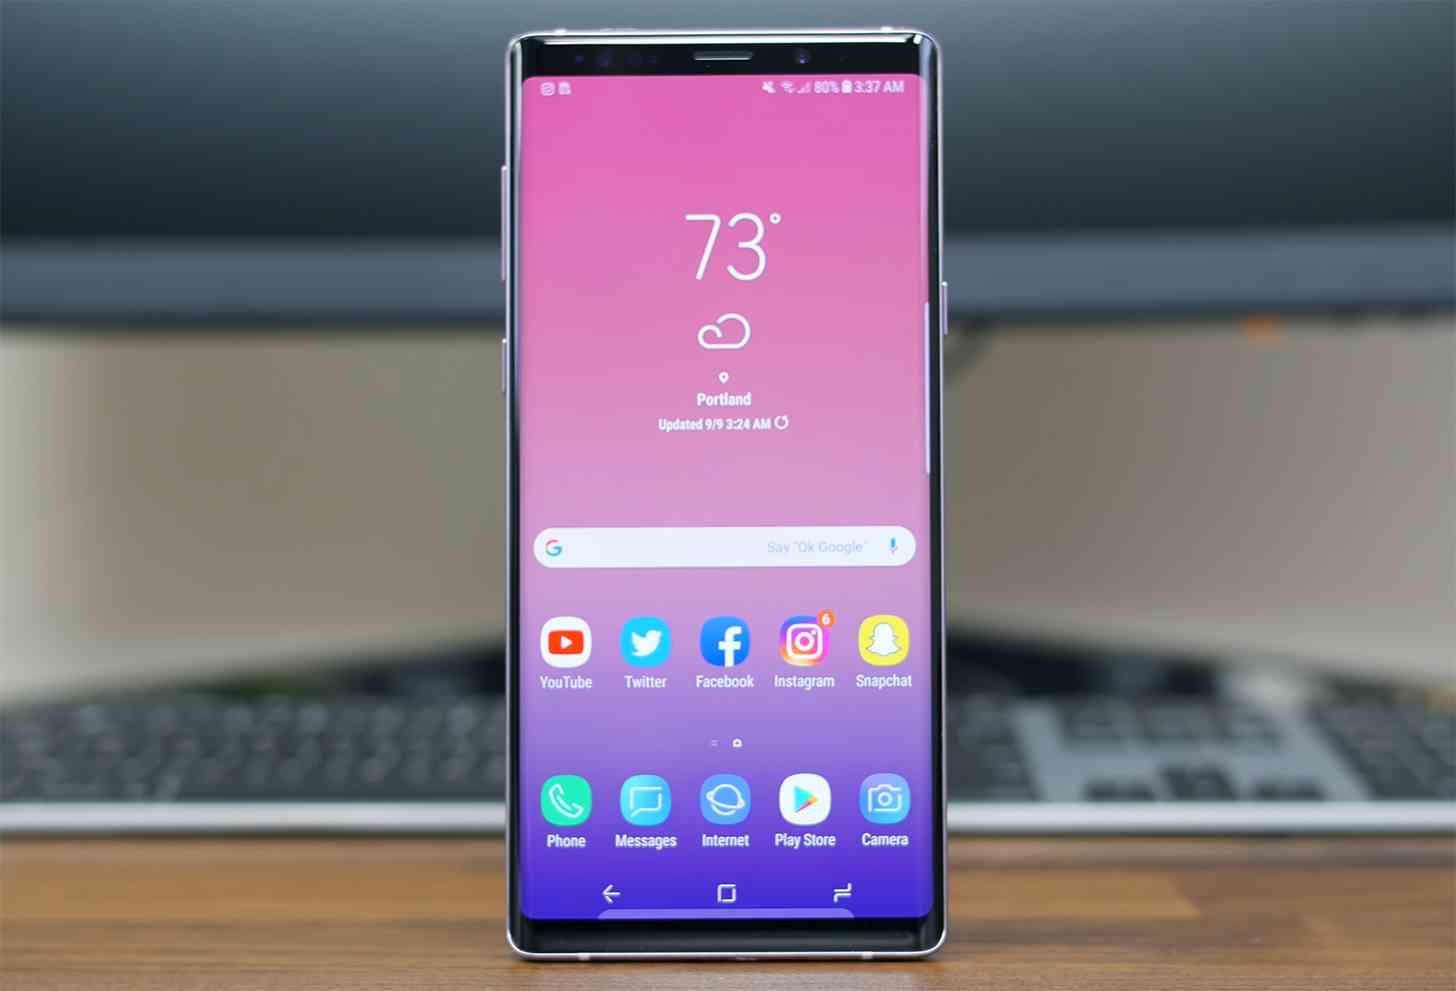 Samsung Galaxy Note 9 hands-on video